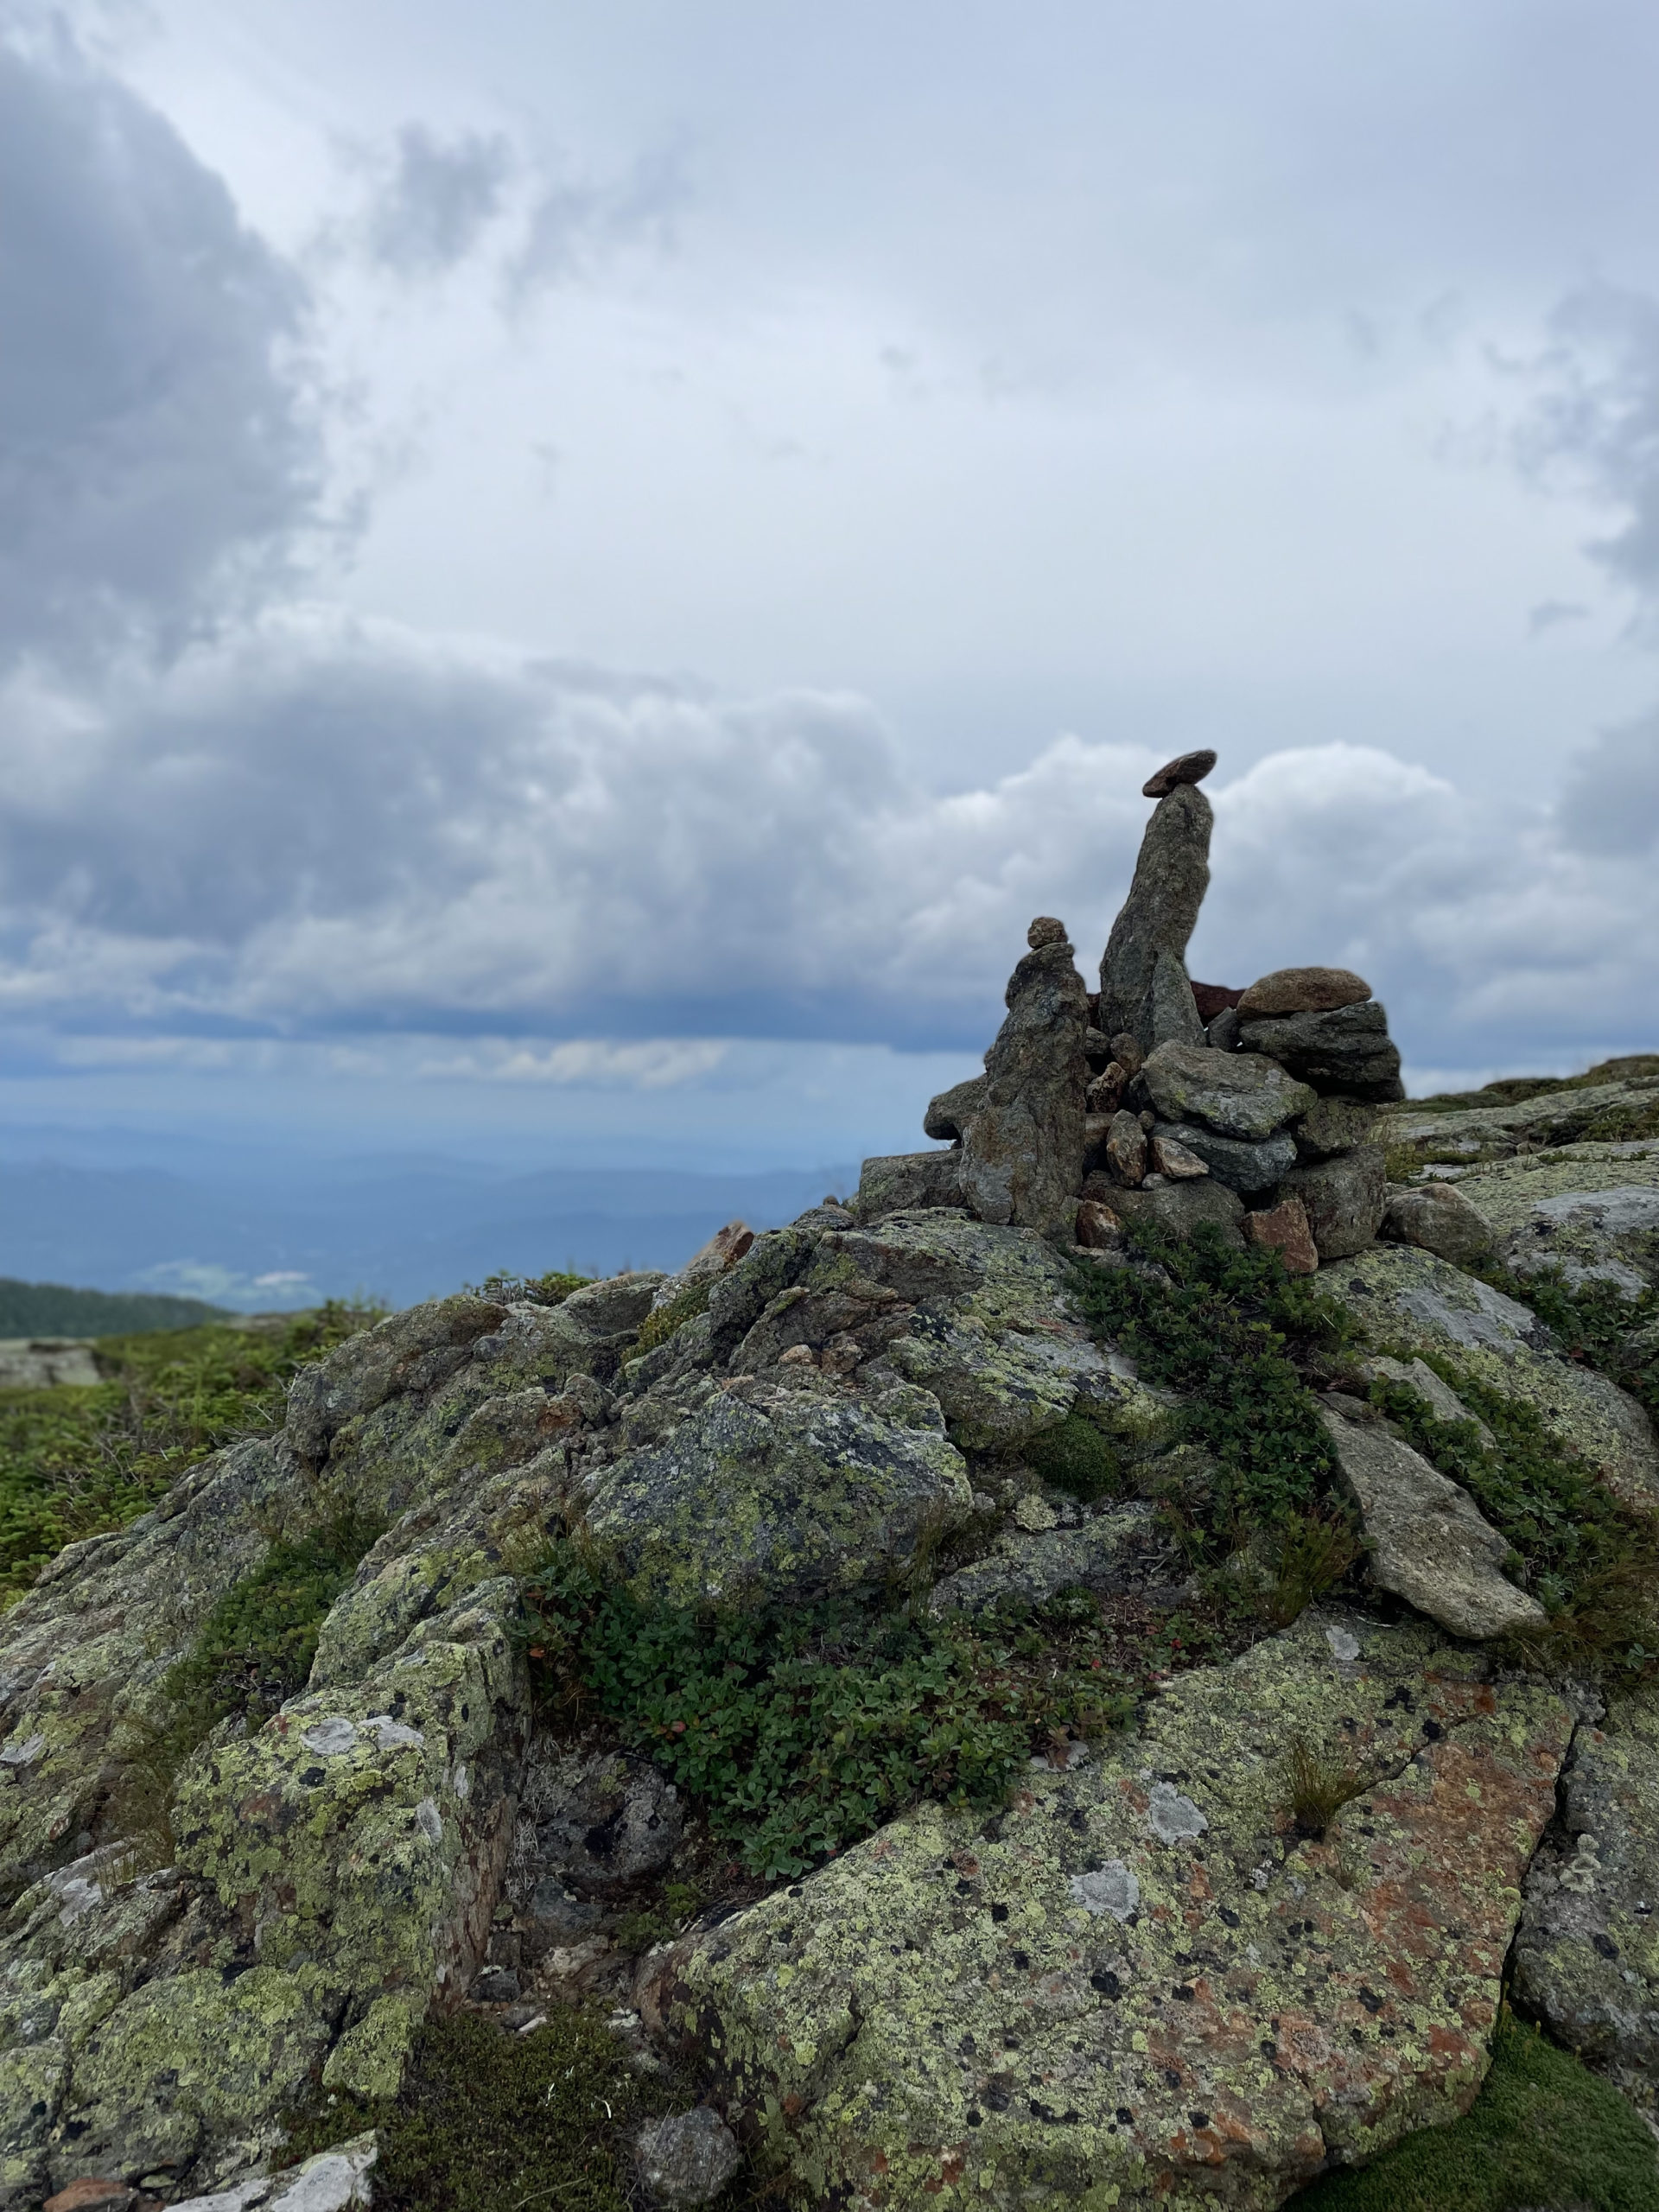 Balanced rocks, seen while hiking Mt. Pierce and Mt. Jackson in the White Mountains National Forest, New Hampshire